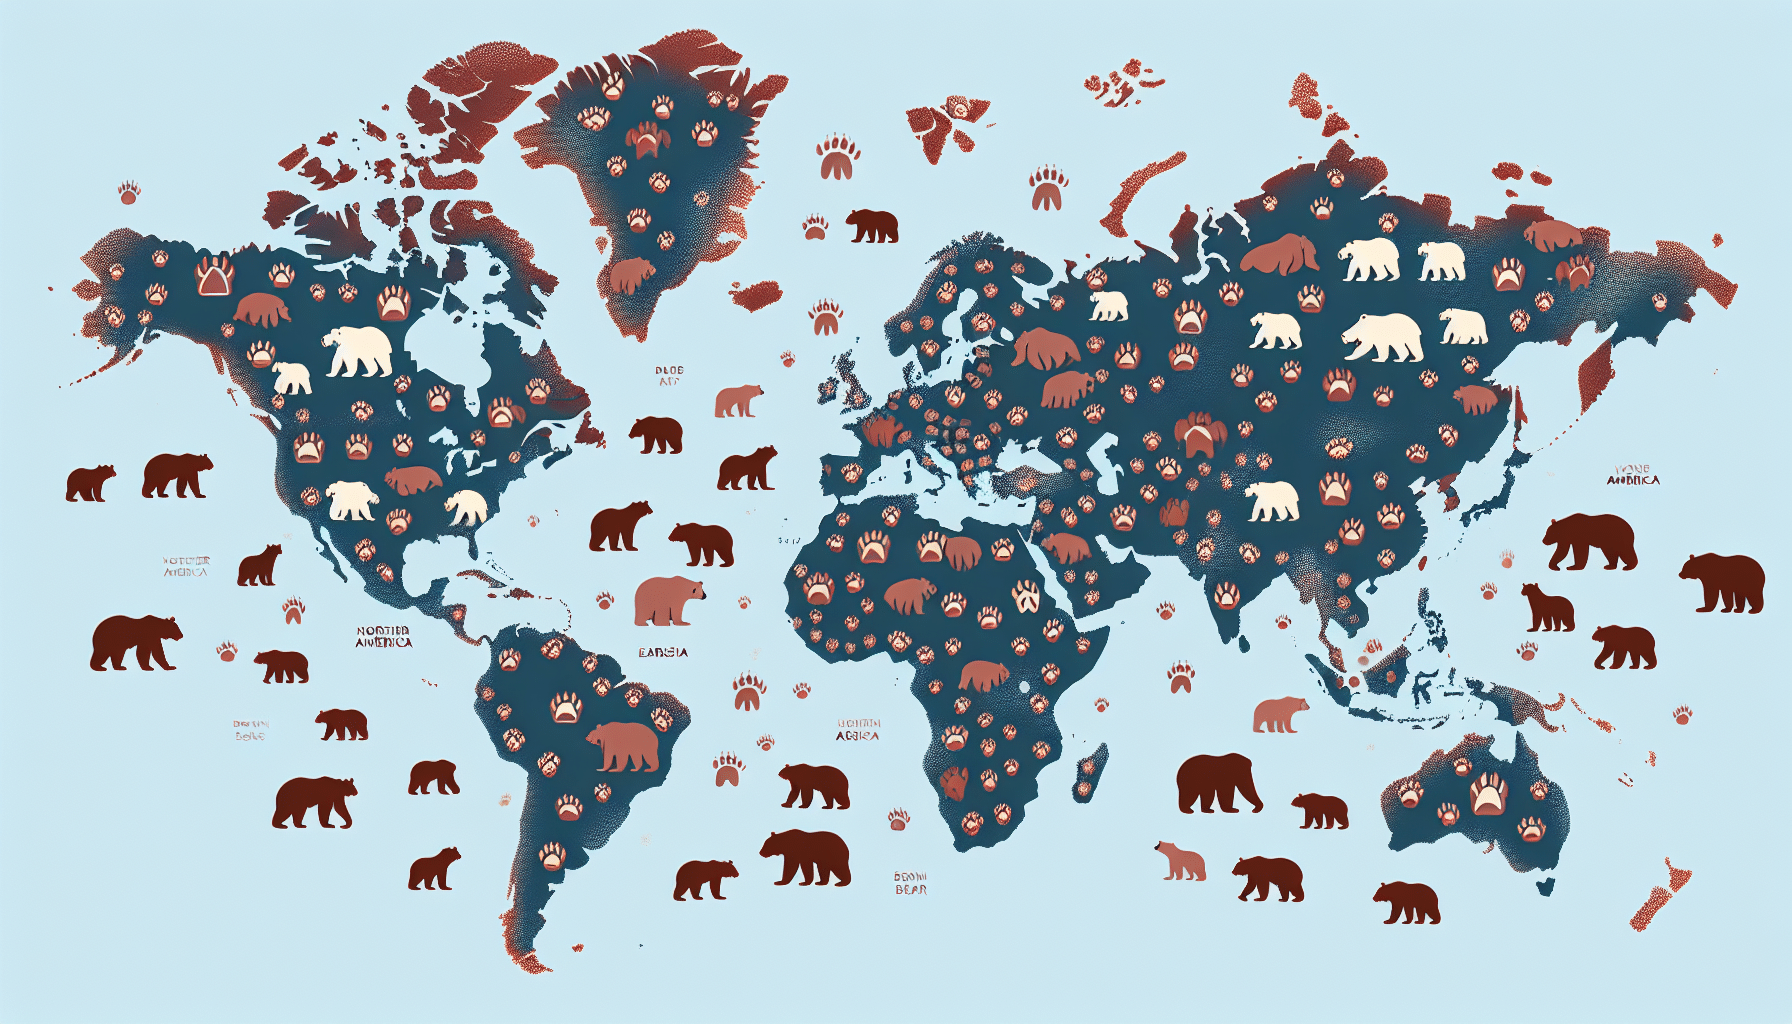 An illustrated world map showing different concentrations of brown bears using symbols. Areas with colder climates like Northern America and Eurasia are depicted with a higher concentration of brown bear symbols. Perhaps, a varied numbers of bear paw prints could represent different bear populations across these continents. Remember to exclude any brand names, logos, humans, or text in this visually descriptive portrayal of brown bear populations worldwide.